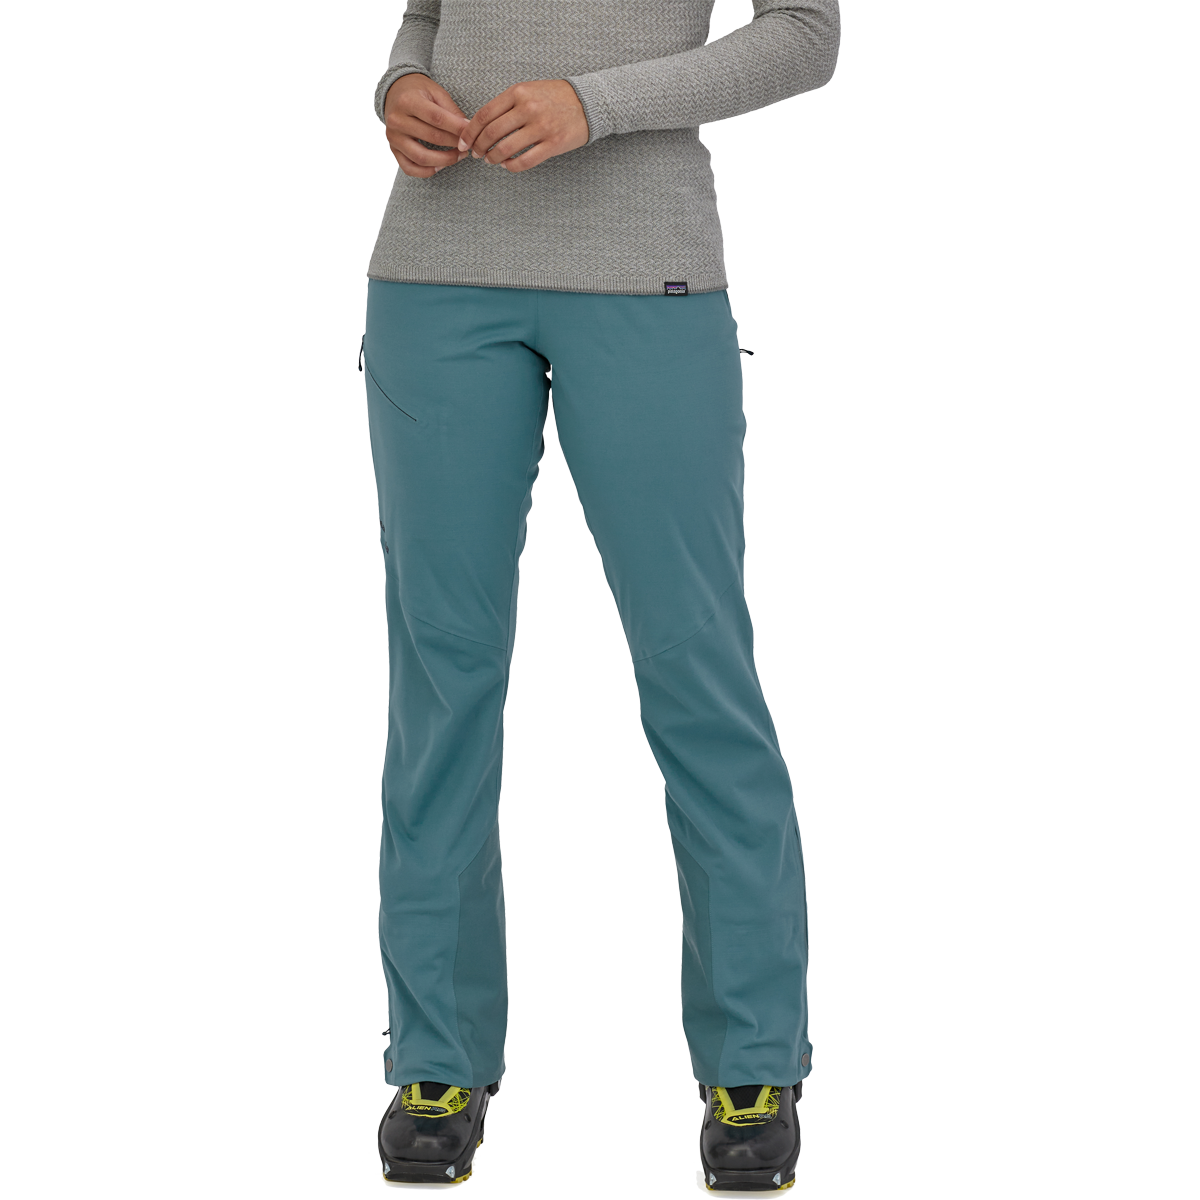 The North Face Amry Soft Shell Short Pants - Women's